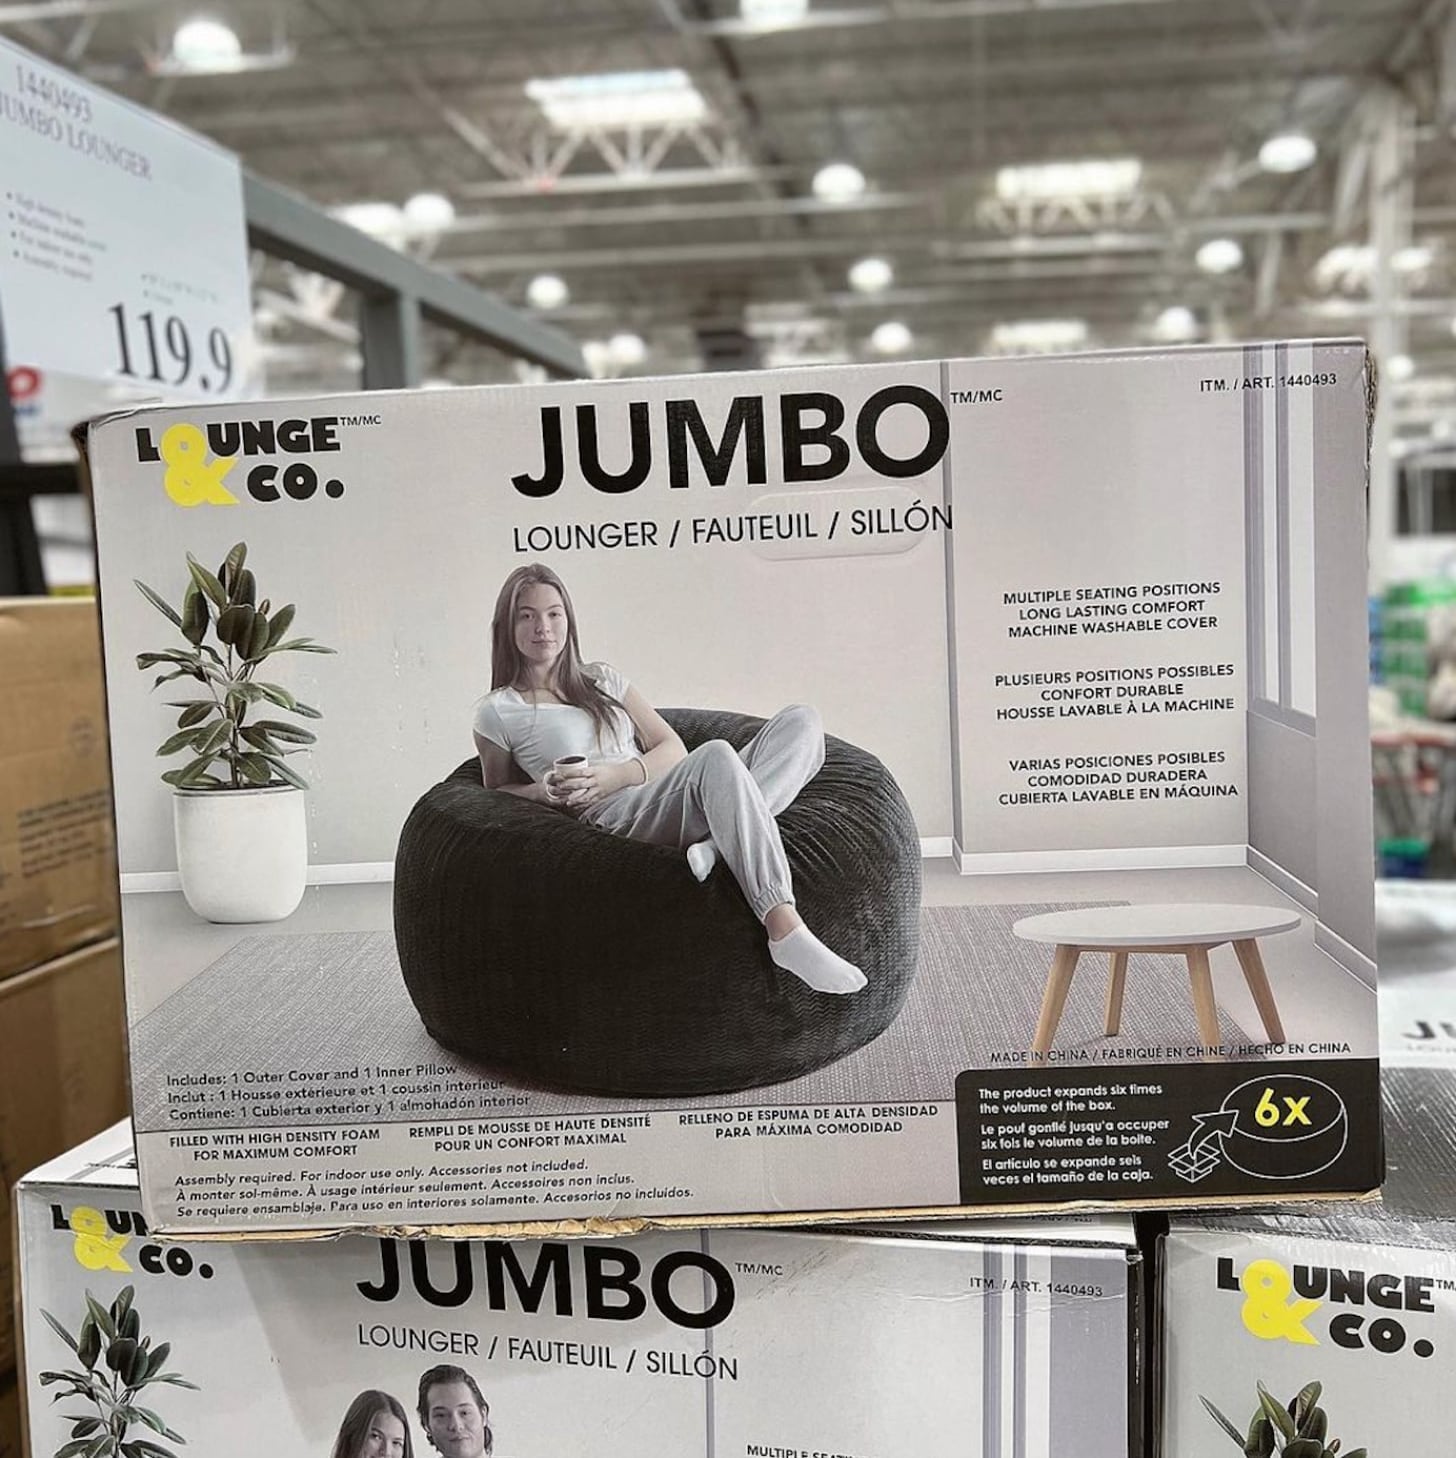 This massive pillow chair is everything that is good with the world